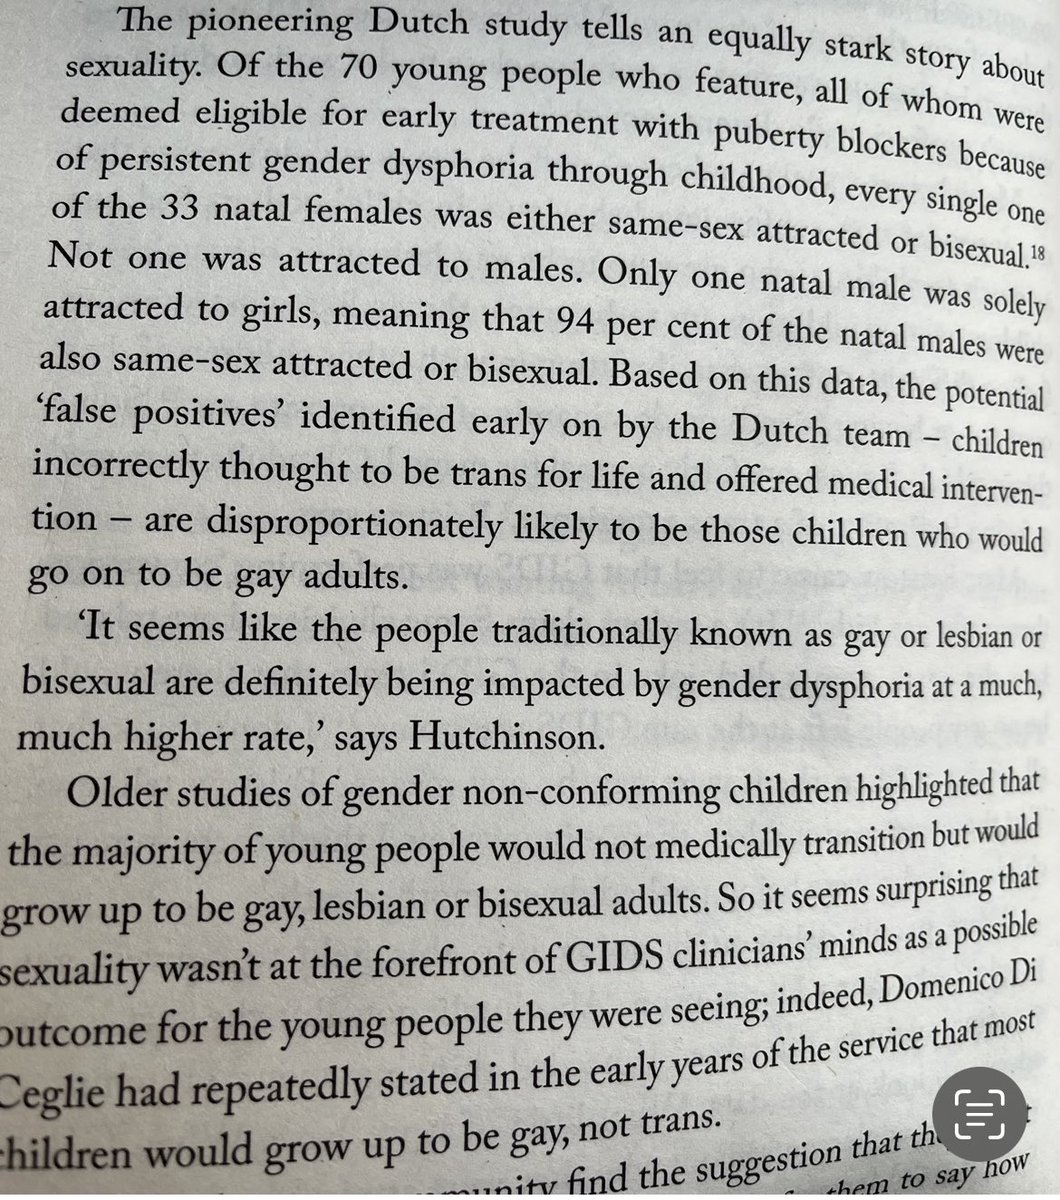 A reminder that, as reported by @hannahsbee in #TimeToThink, of the 70 young ppl in the Dutch study that everyone else has copied, 69 were same-sex attracted. How is this NOT gay conversion therapy? #TransTheGayAway